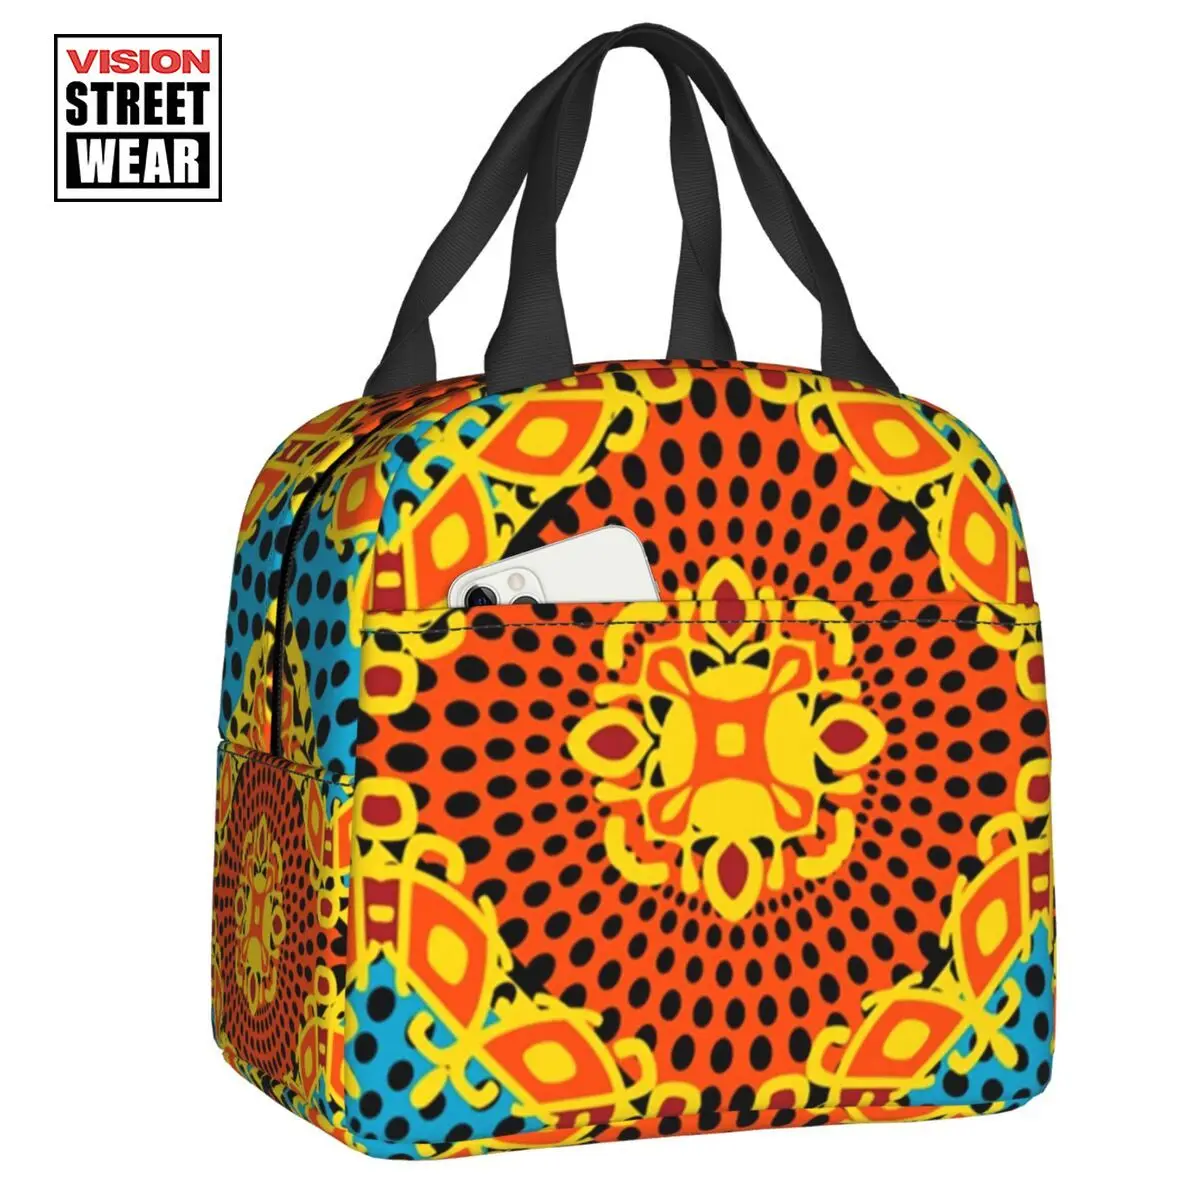 

Colorful African Ankara Flower Print Insulated Lunch Bag For Africa Tribal Art Thermal Cooler Bento Box Work School Travel